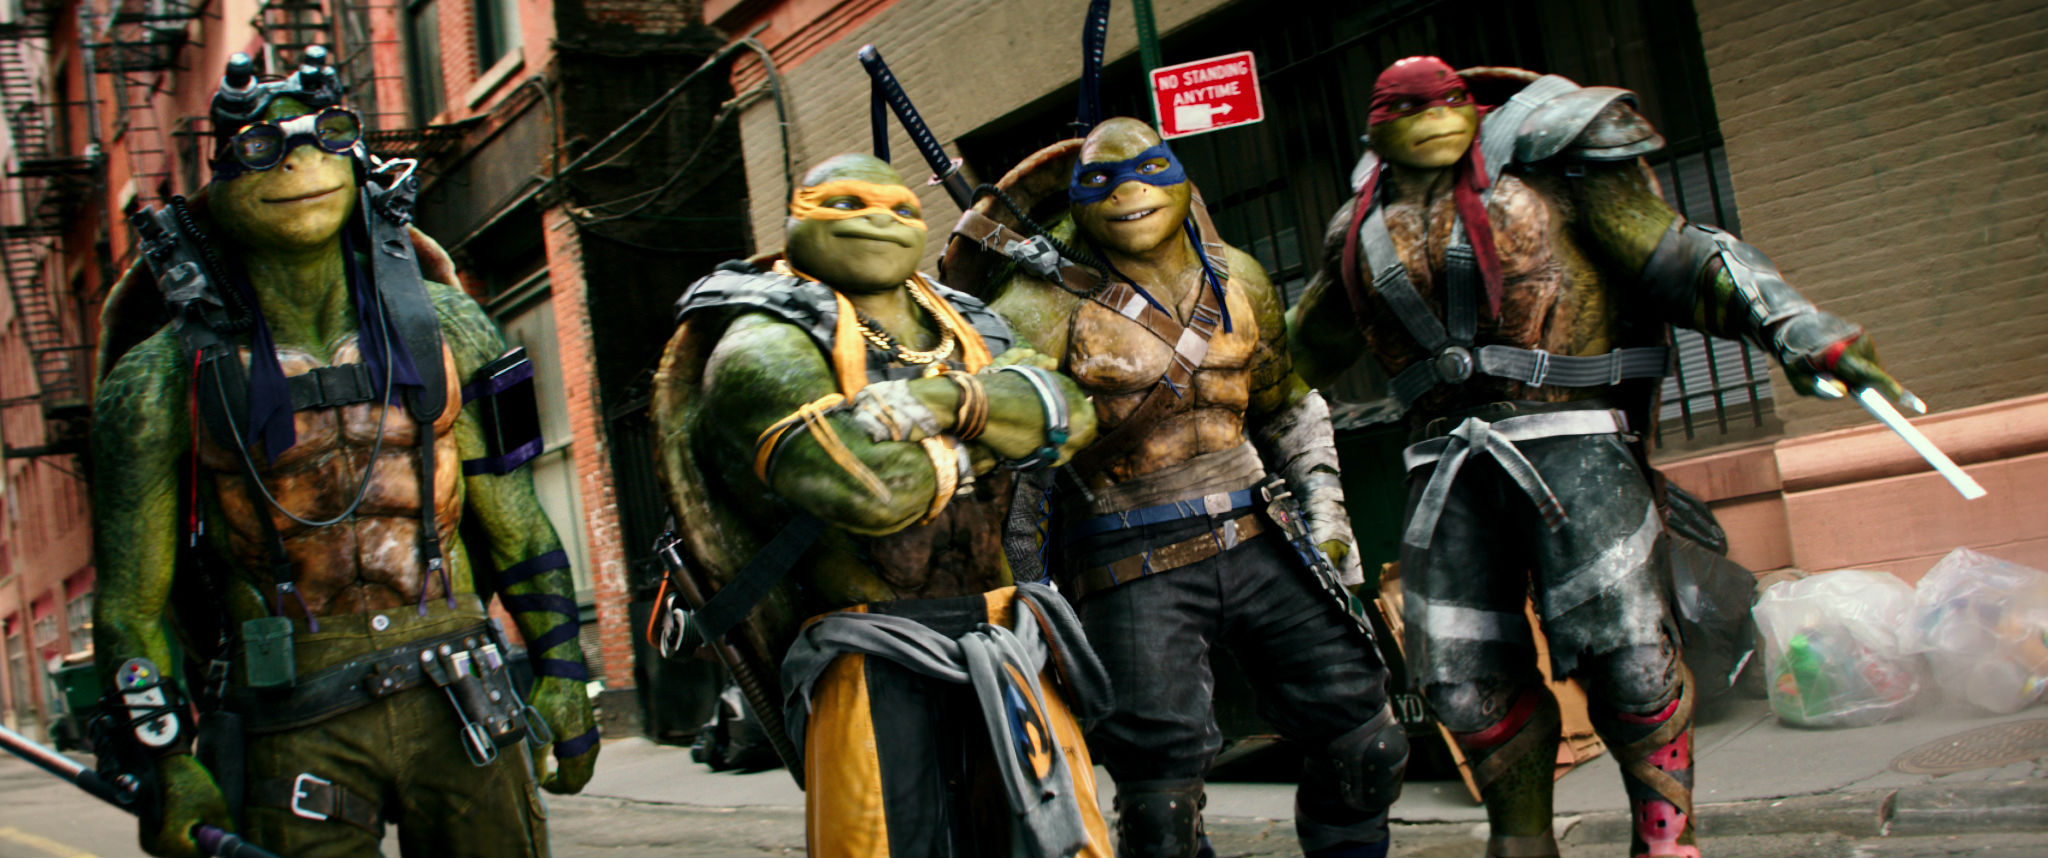 Watch Trailer To Teenage Mutant Ninja Turtles: Out of the Shadows ...